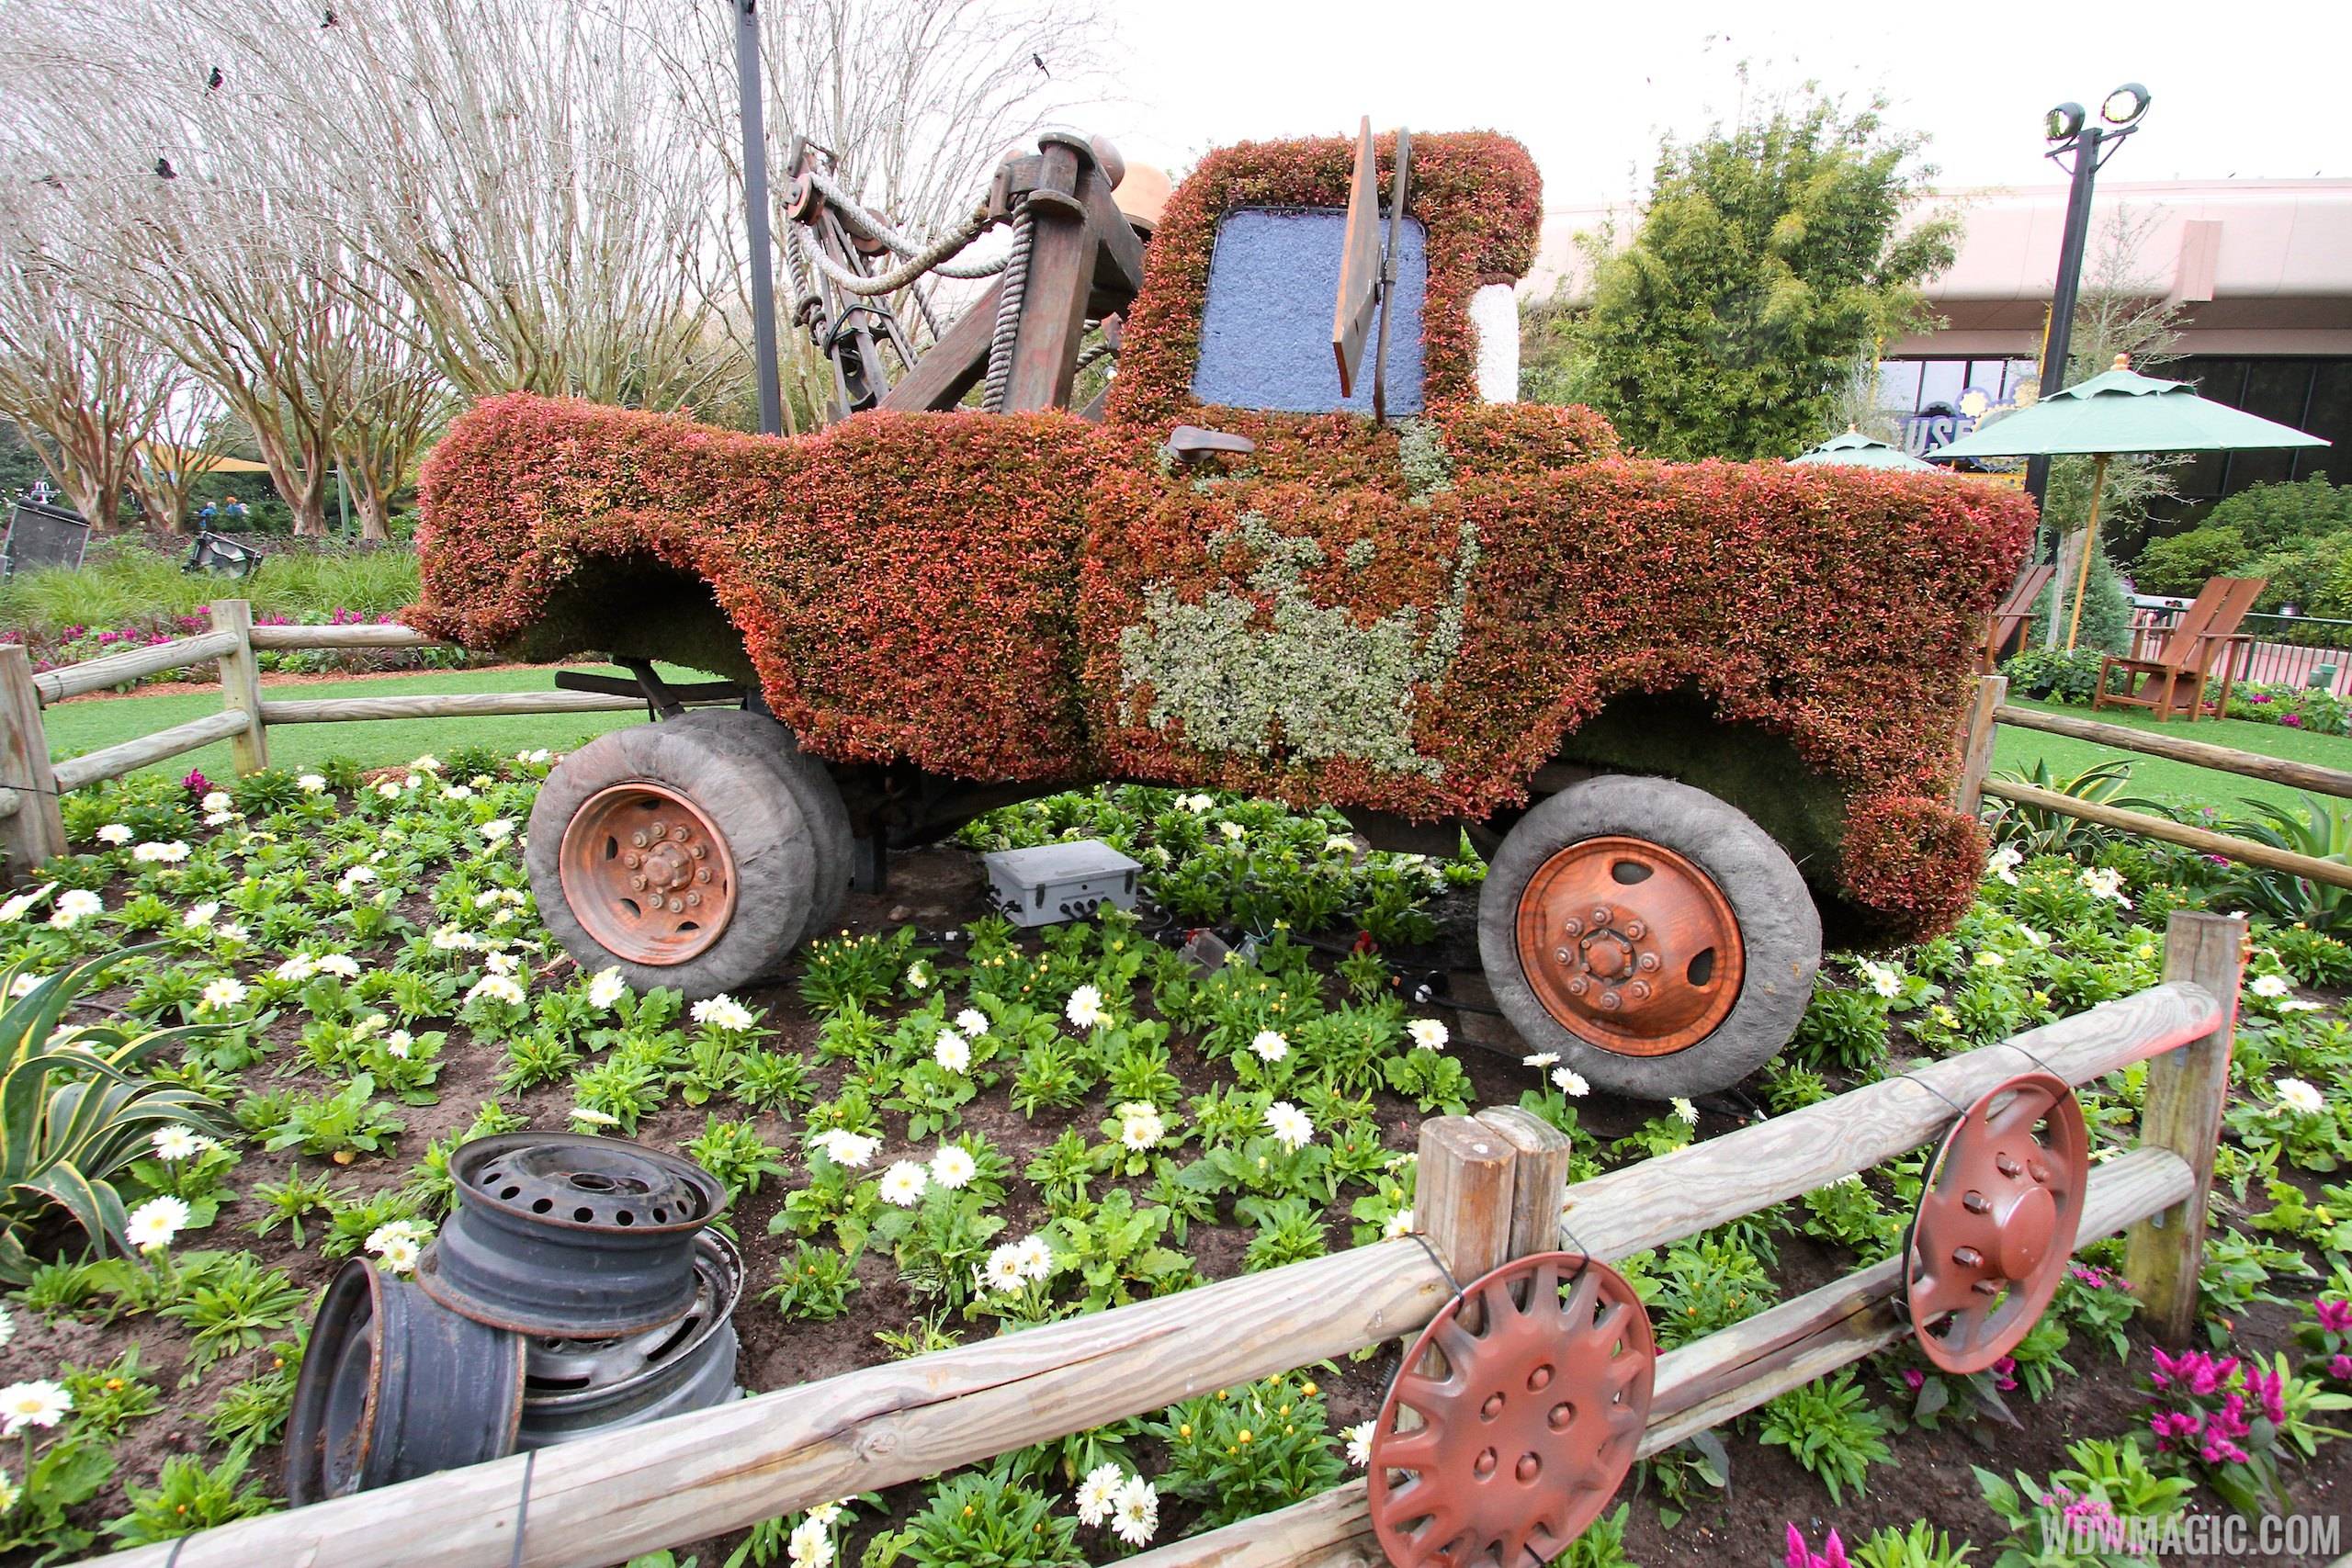 2014 Epcot Flower and Garden Festival - Mater topiary